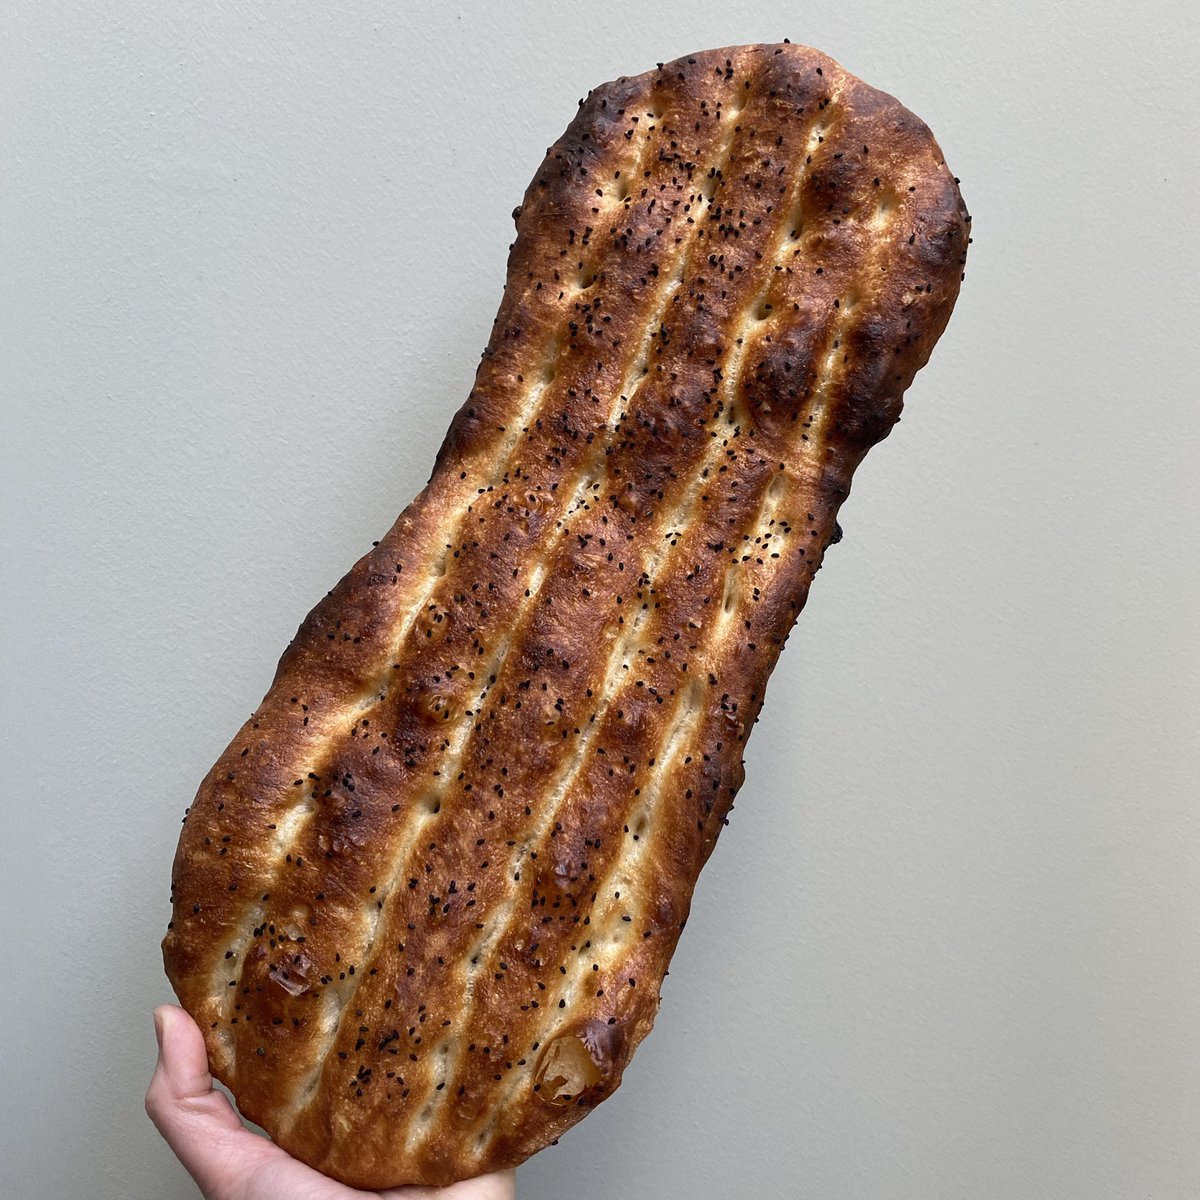 Nan-e Barbari
Iranian flatbread. Great with dips but split open it is perfect for bacon and eggs or your favourite sandwich fillings. Delicious!
#shareyourloaves #nanebarbari #bread #edinburghfood #microbakery #teamrm2020